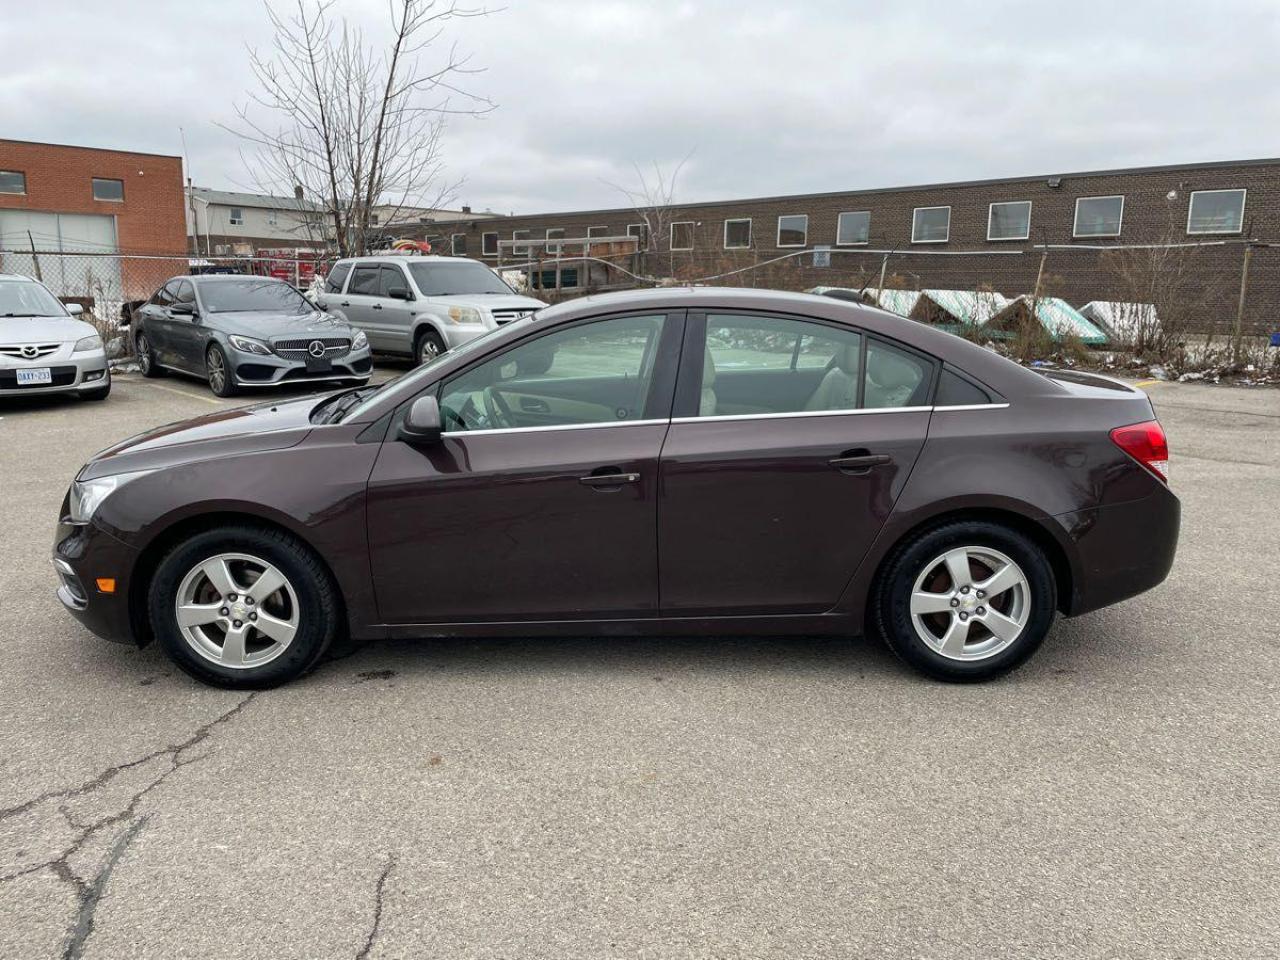 used 2015 Chevrolet Cruze car, priced at $7,999